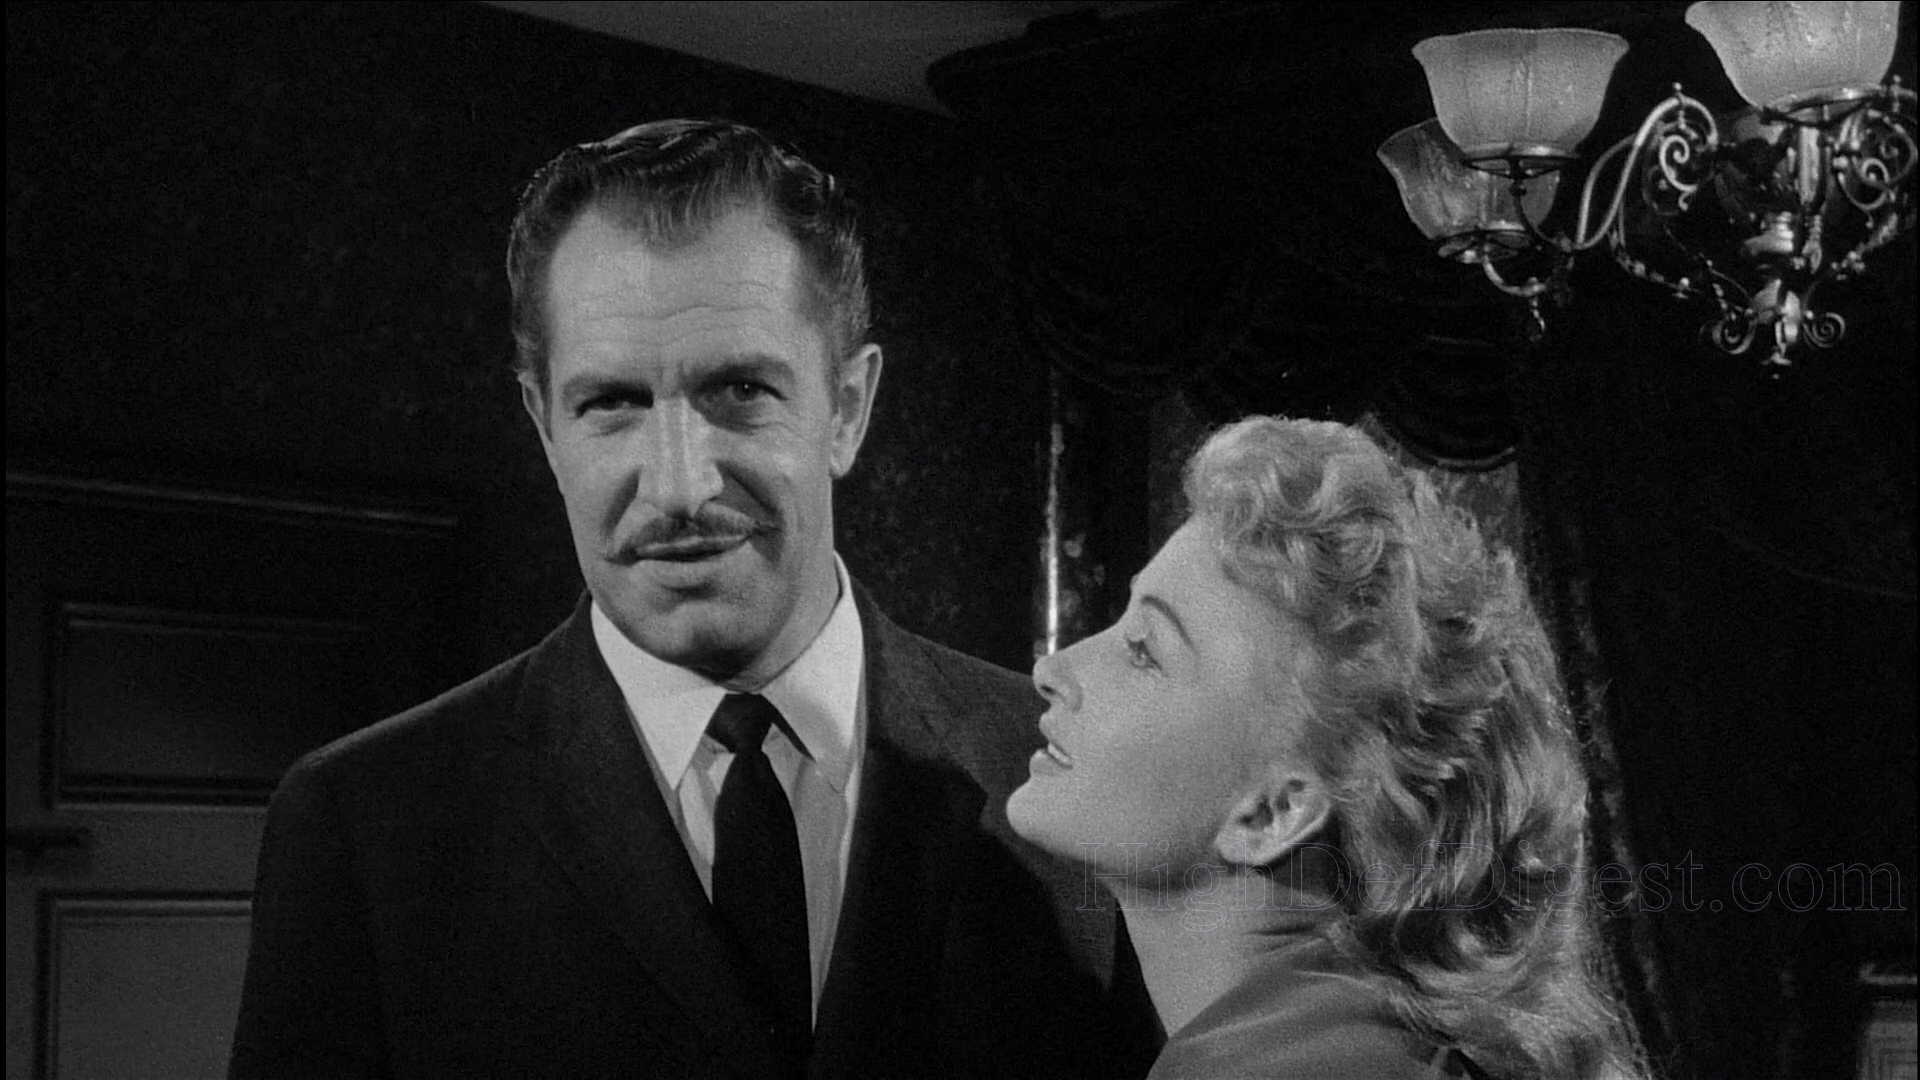 House On Haunted Hill [1959]